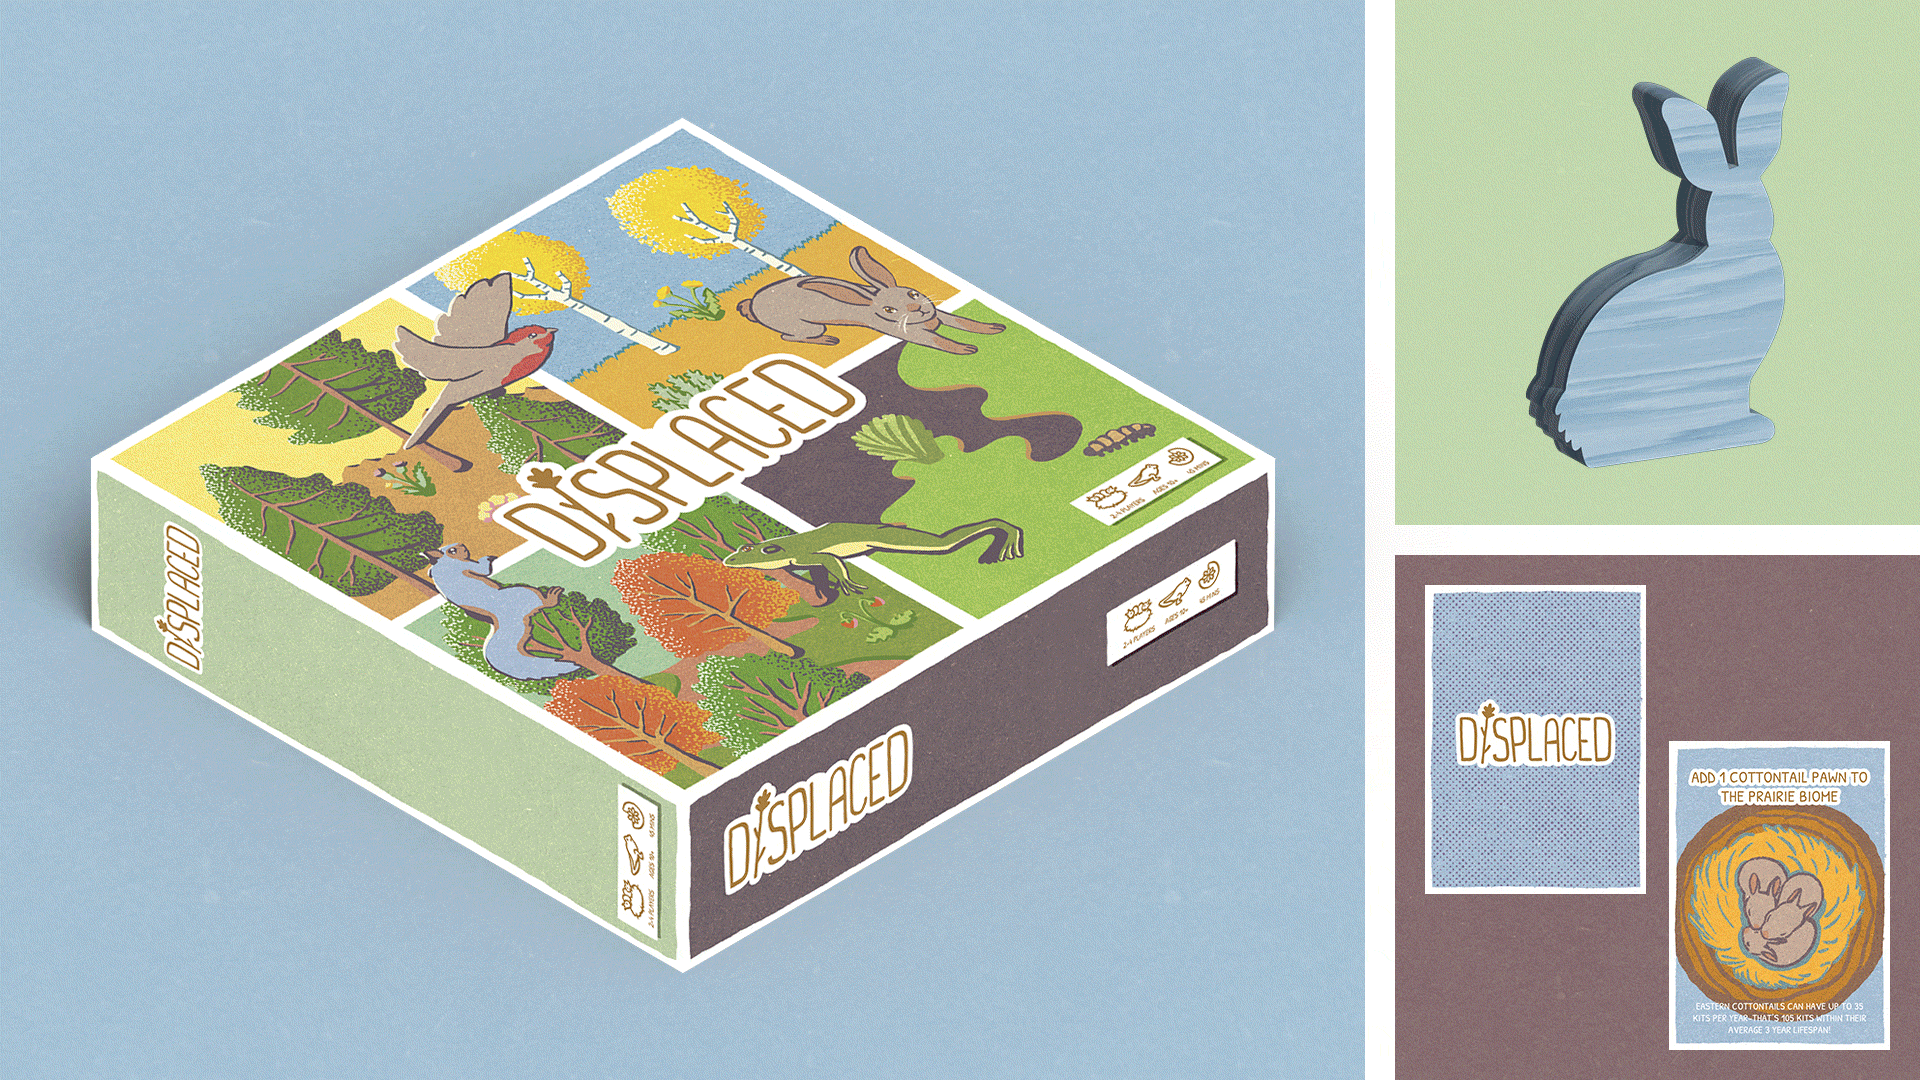 Board game box design mockup alongside cycling images of game components.